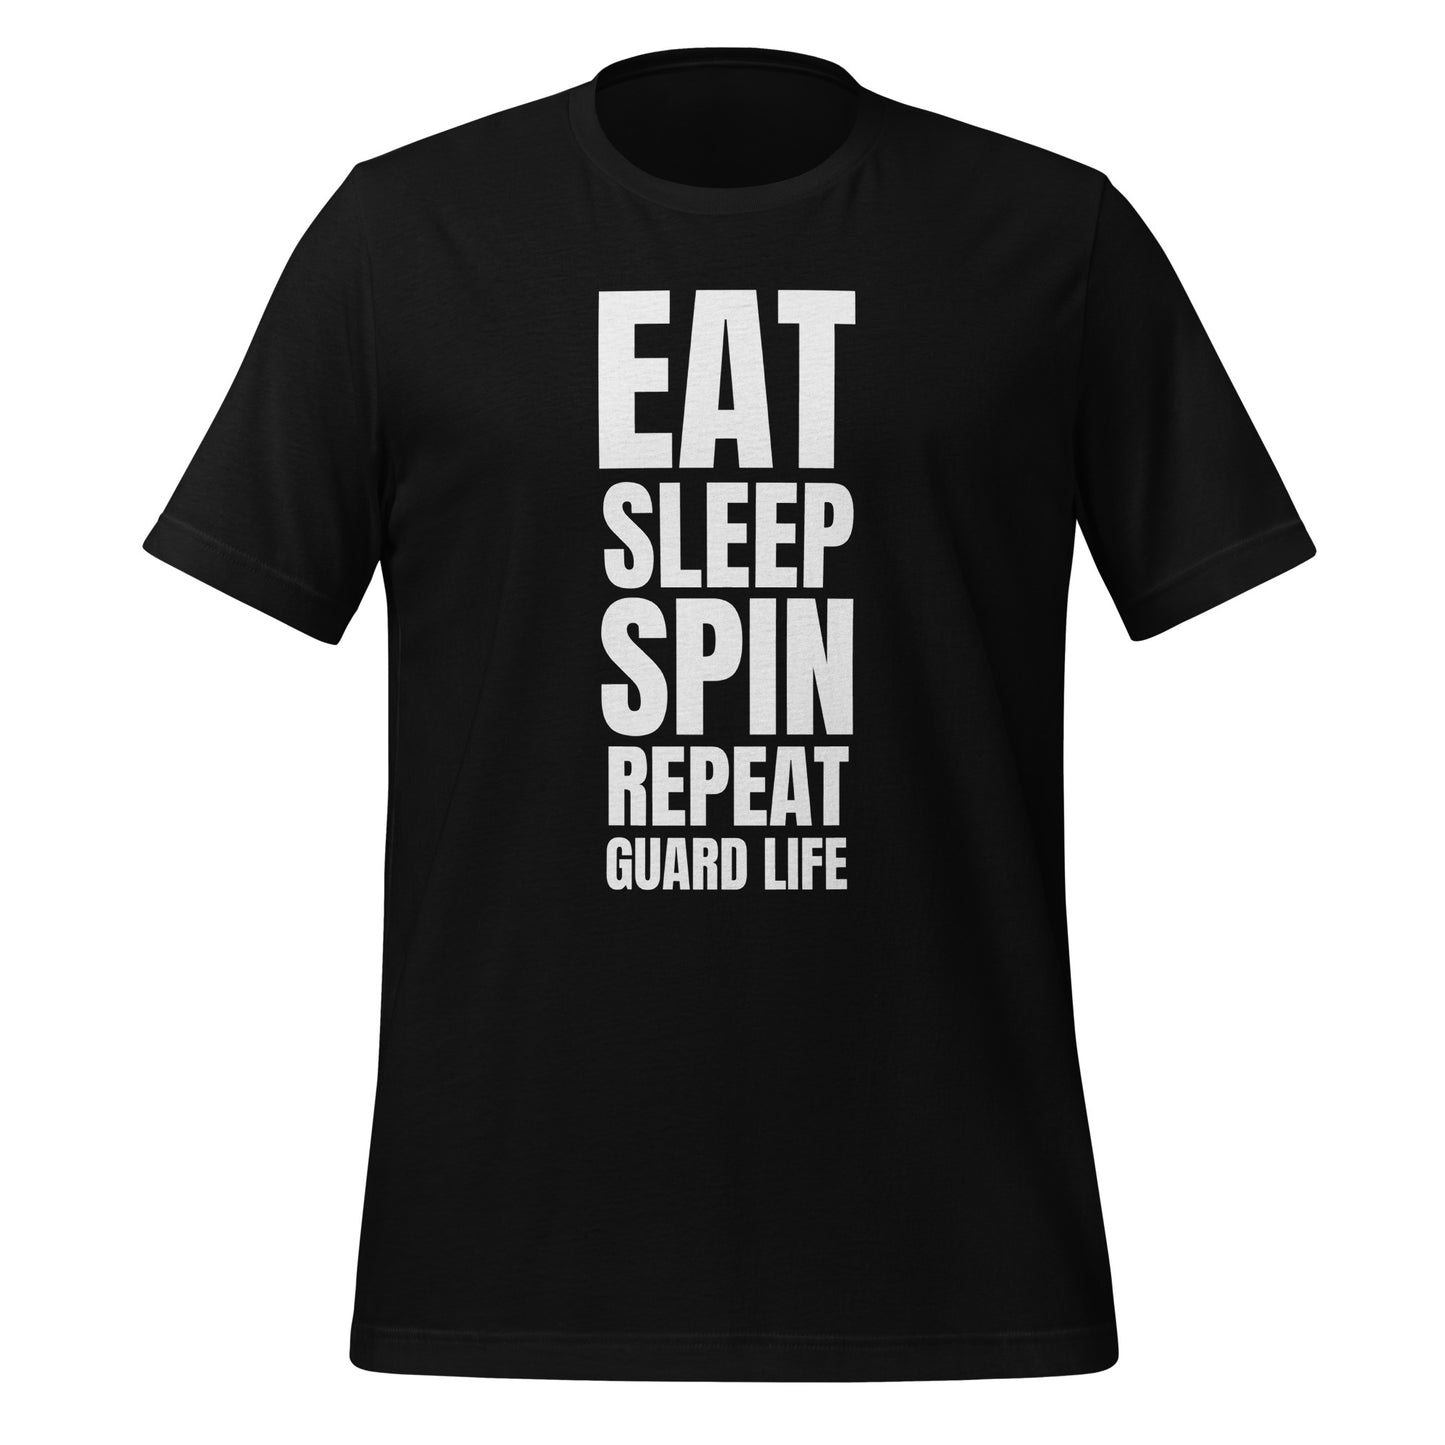 EAT. SLEEP. SPIN. REPEAT (Color Guard) Adult T-Shirt